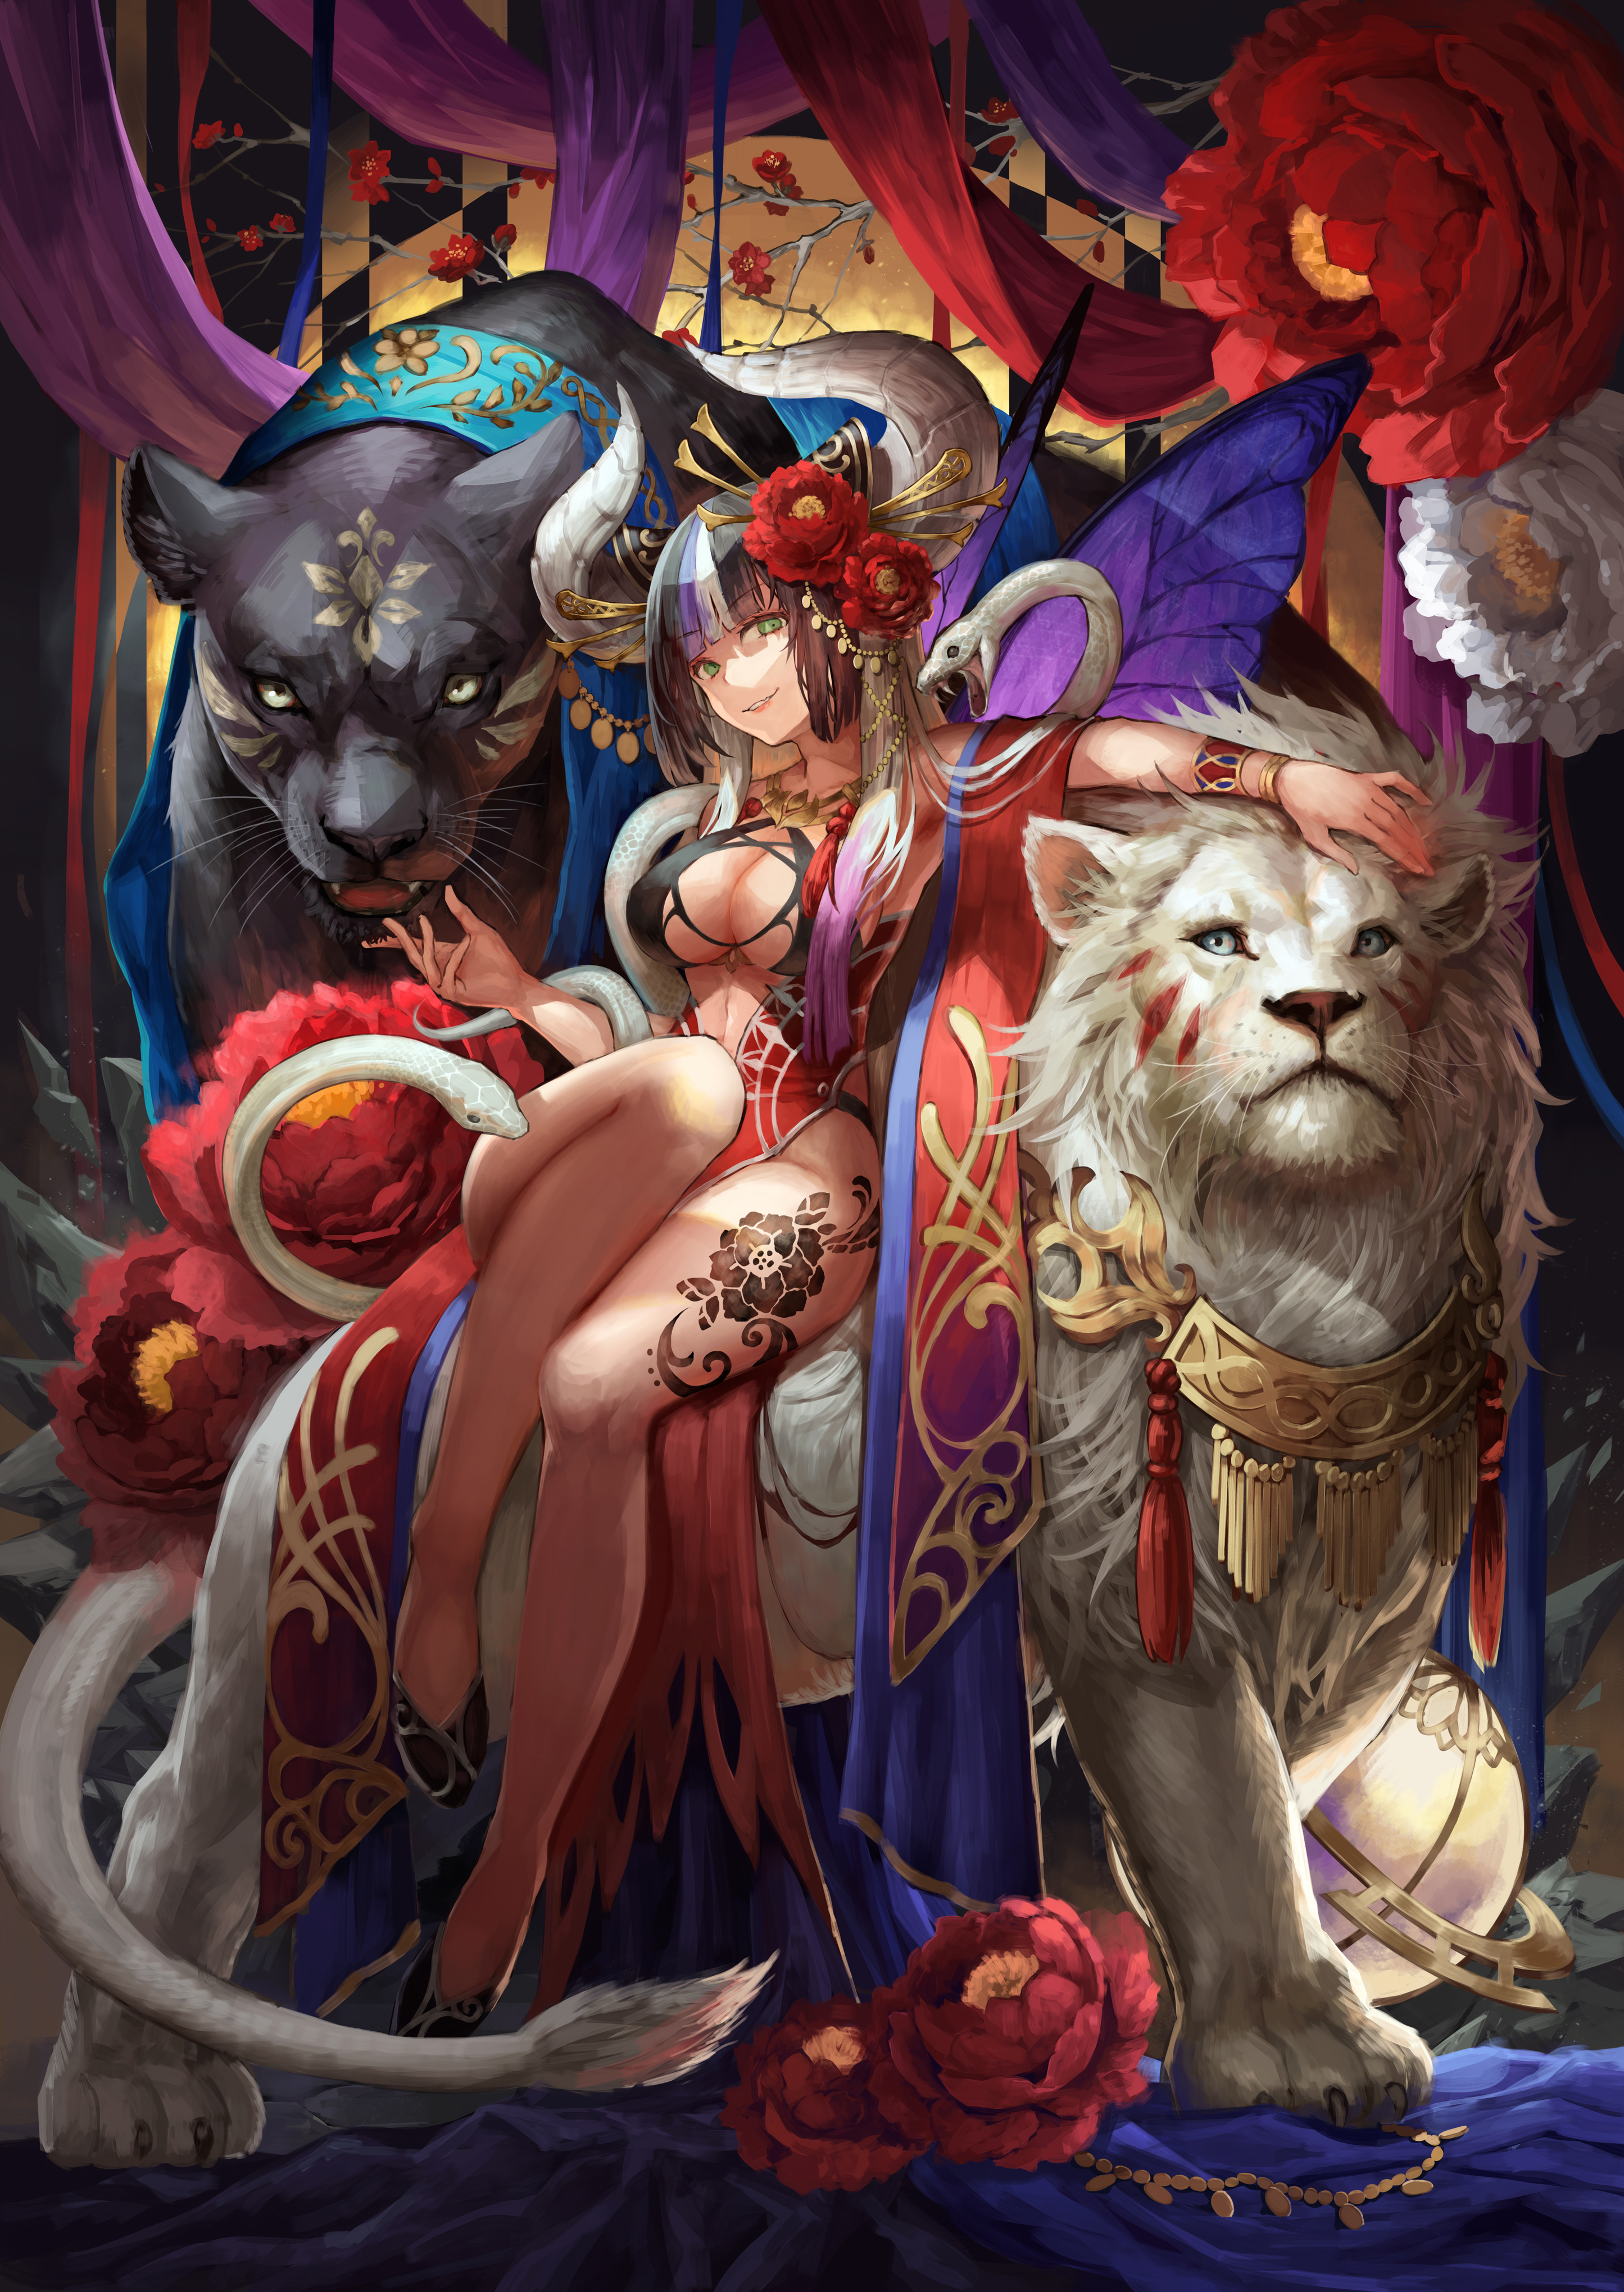 Anime 2890x4079 anime girls original characters women green eyes eyes horns flower in hair flowers cleavage big boobs dress sitting fantasy girl lion white lion panthers vipers wings cloth fantasy art looking at viewer smiling artwork digital painting illustration 2D digital art Mai Okuma tattoo animals anime